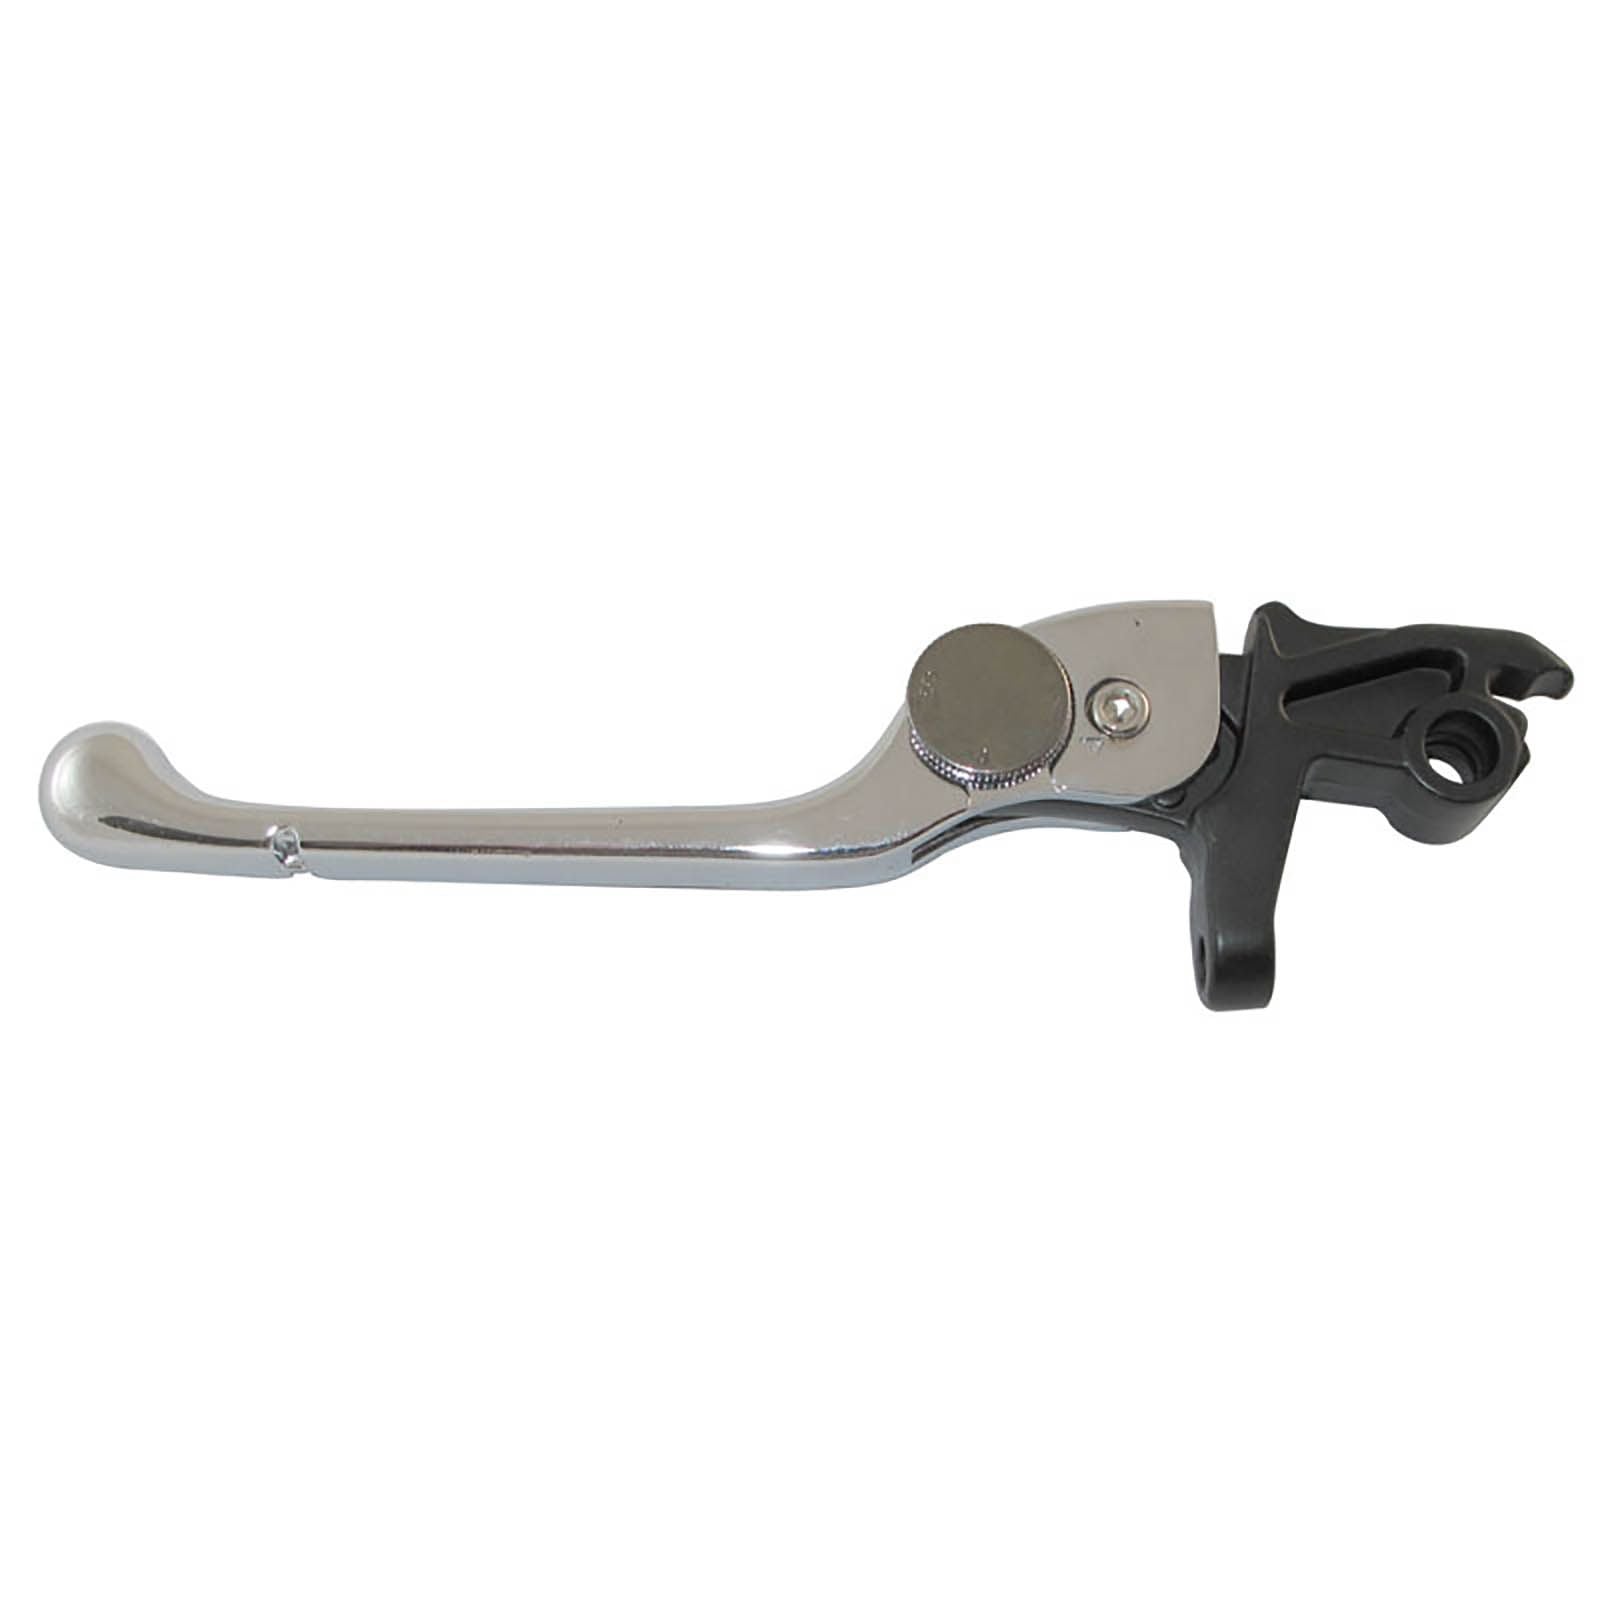 New WHITES Motorcycle Clutch Lever #LCBM652